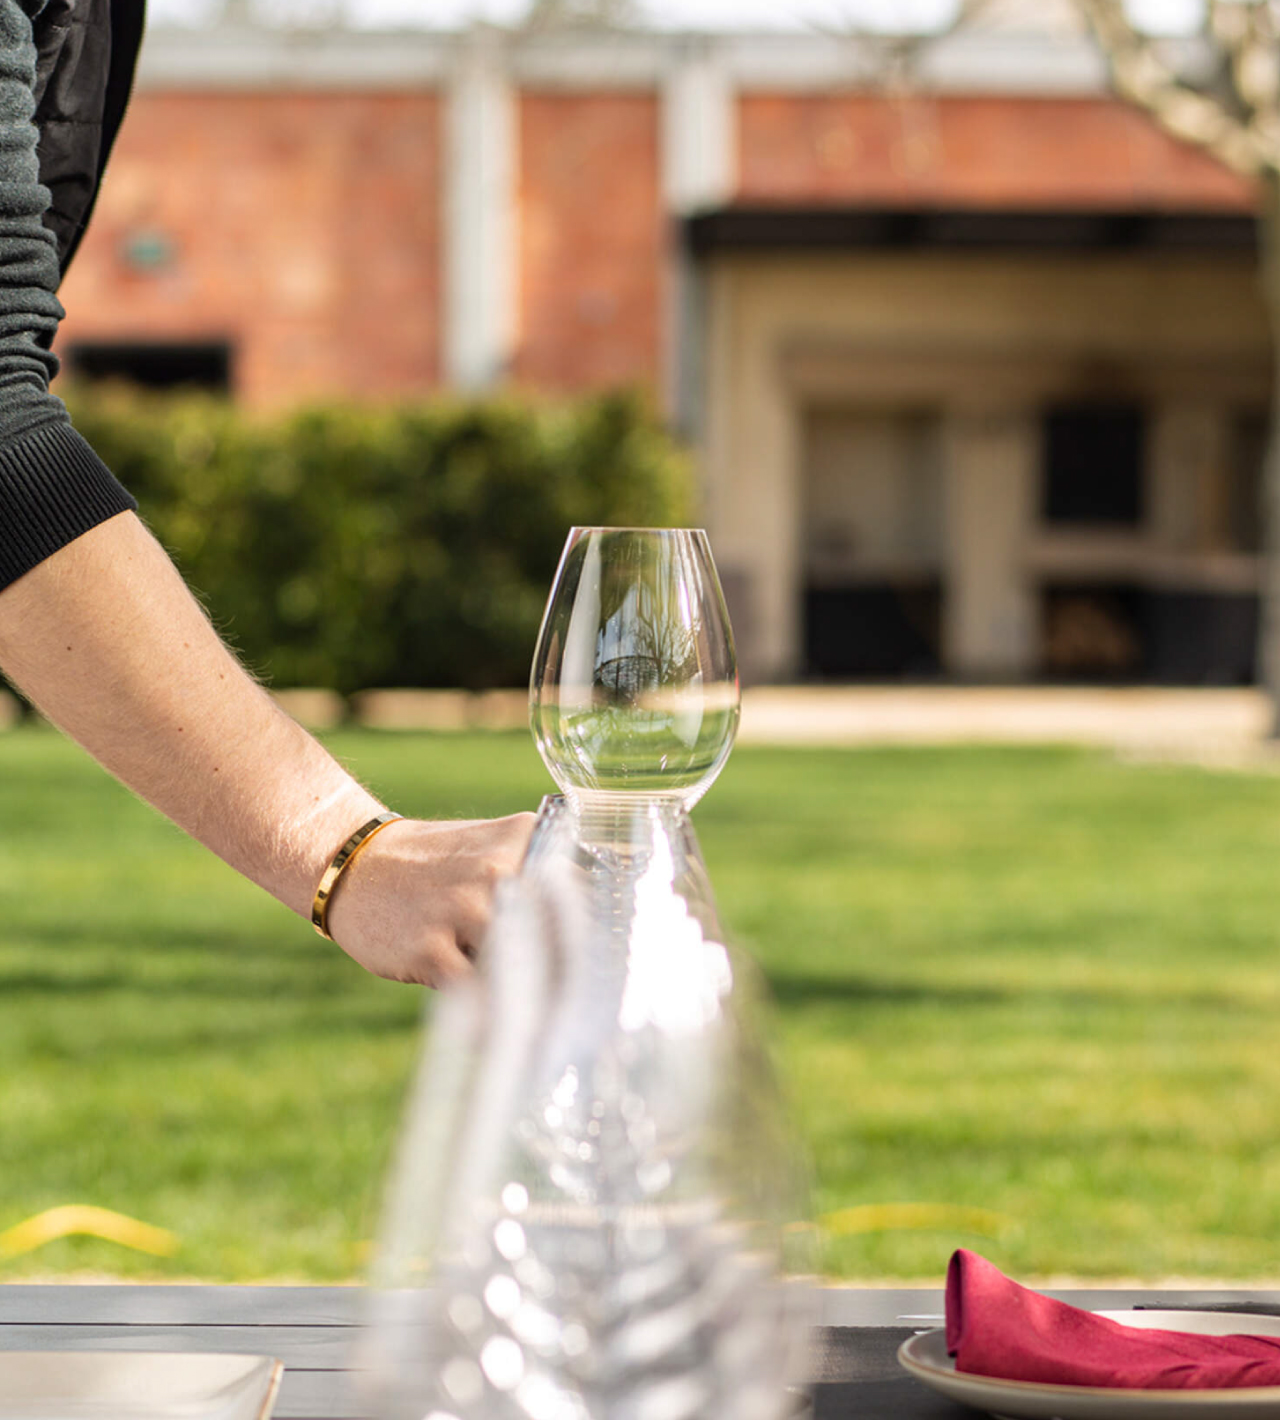 Person placing a wine glass next to other wine glasses on a table outdoors.